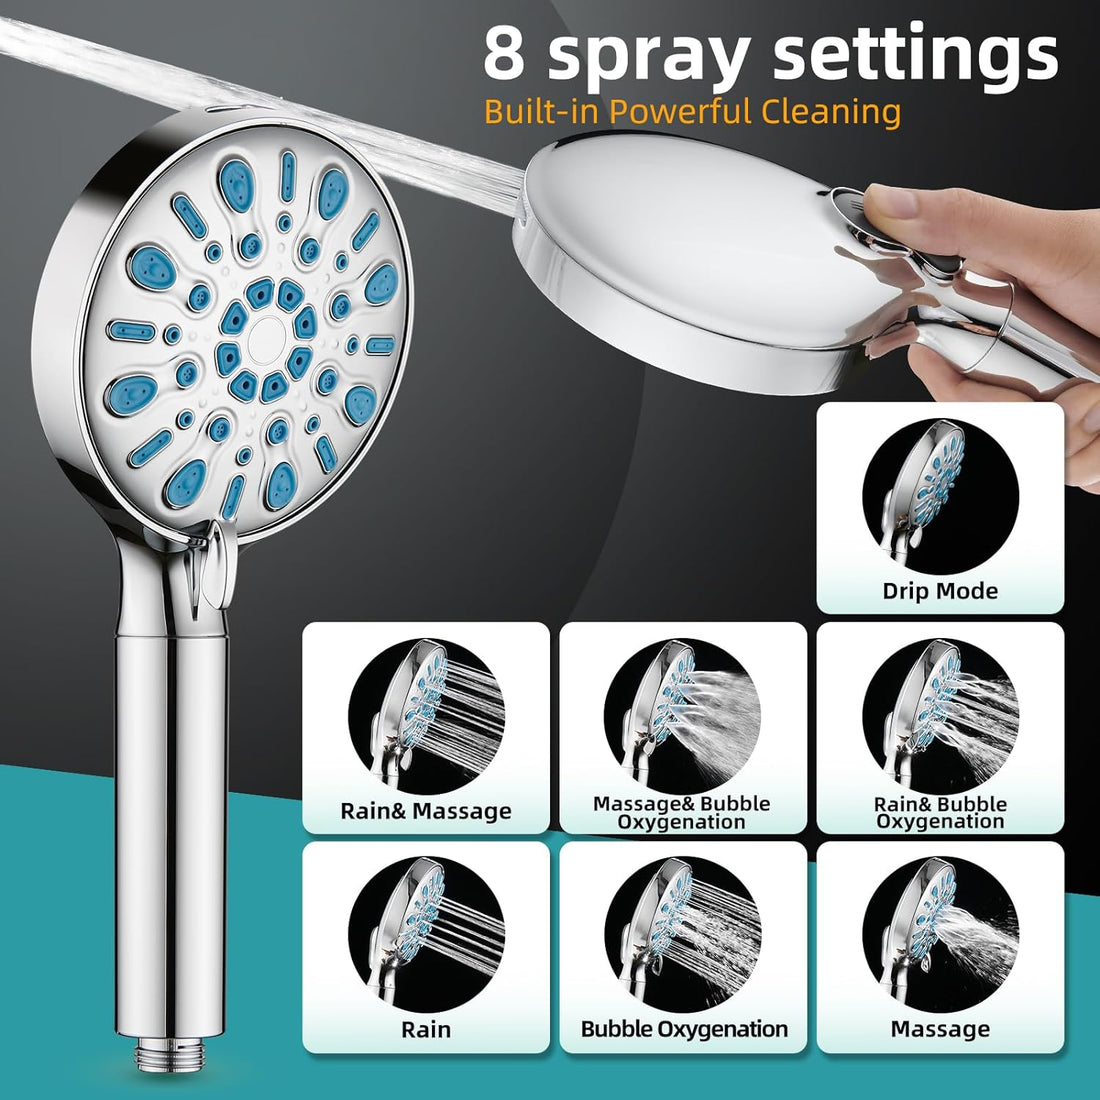 Heemli Filtered Shower Head,High Pressure 8-mode Handheld Showerhead with Hose,Bracket and Water Softener Filters Beads for Hard Water Remove Chlorine and Harmful Substance,Built-in Power Spray,Chrome